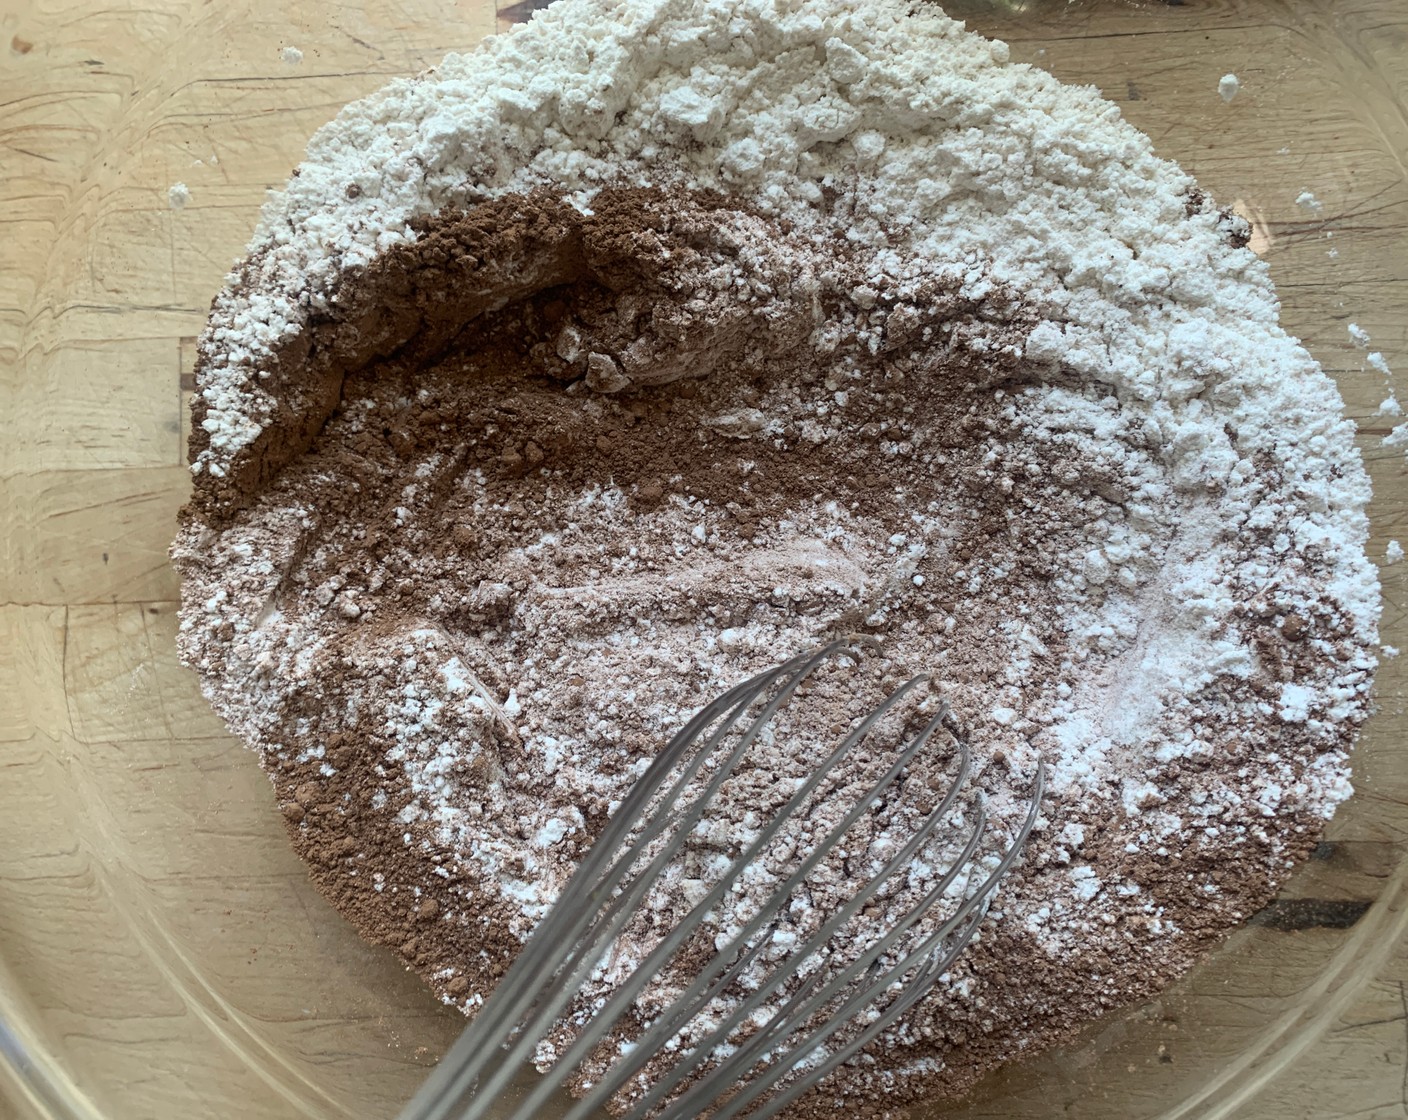 step 4 In a medium bowl, whisk together the All-Purpose Flour (2 cups), Unsweetened Cocoa Powder (3/4 cup), Baking Soda (1/2 tsp), Baking Powder (1 tsp), and Kosher Salt (1/2 tsp).